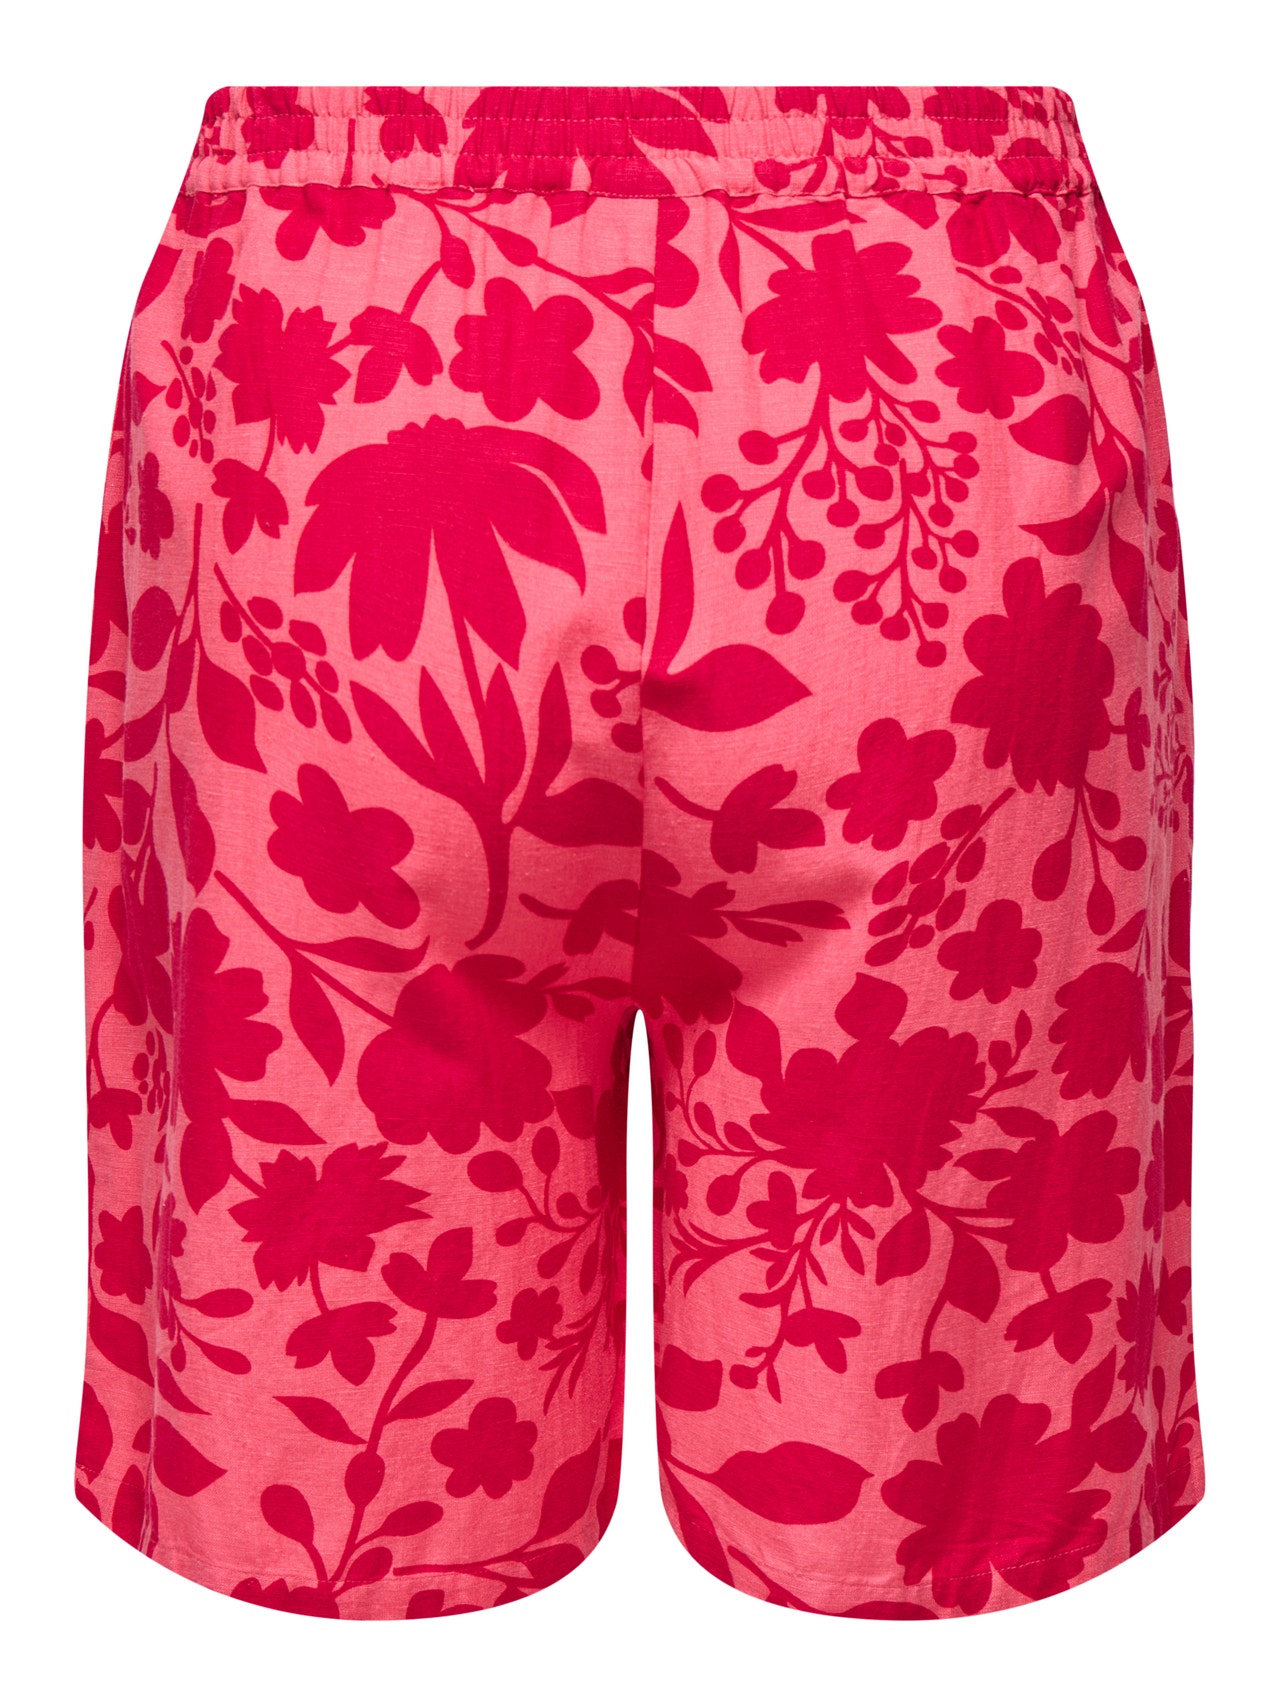 ONLY Curvy patterned shorts -Coral Paradise - 15319767